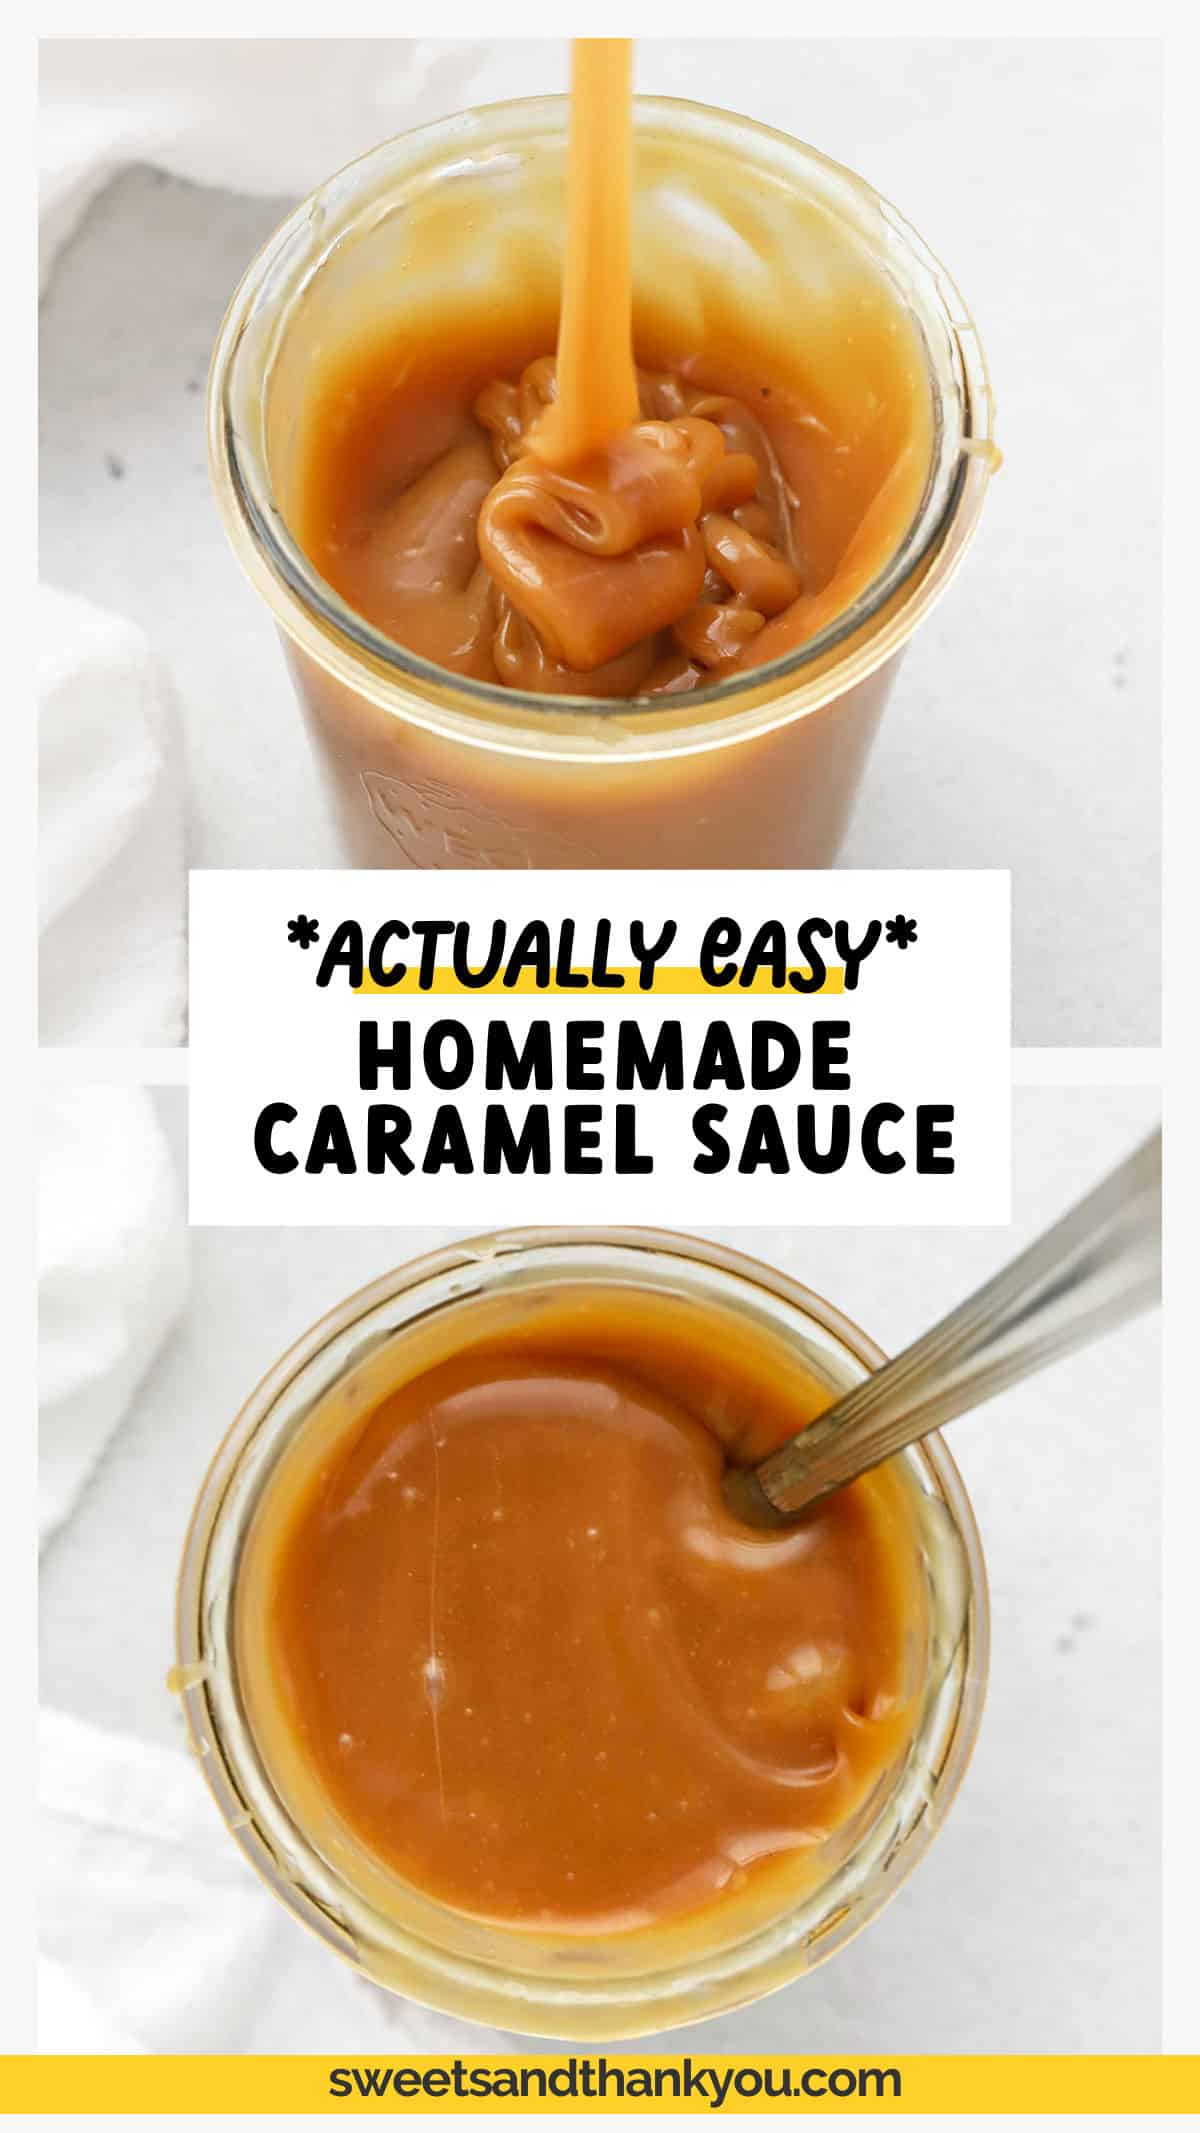 Learn How To Make Caramel Sauce! Our easy homemade caramel sauce recipe is great for beginners and baking pros alike. You'll love it on ice cream, cake, brownies and more! With our step by step tutorial, we'll walk you through everything you need to know to make the best homemade caramel sauce. Get the recipe and 12+ way to use caramel sauce at Sweets & Thank You